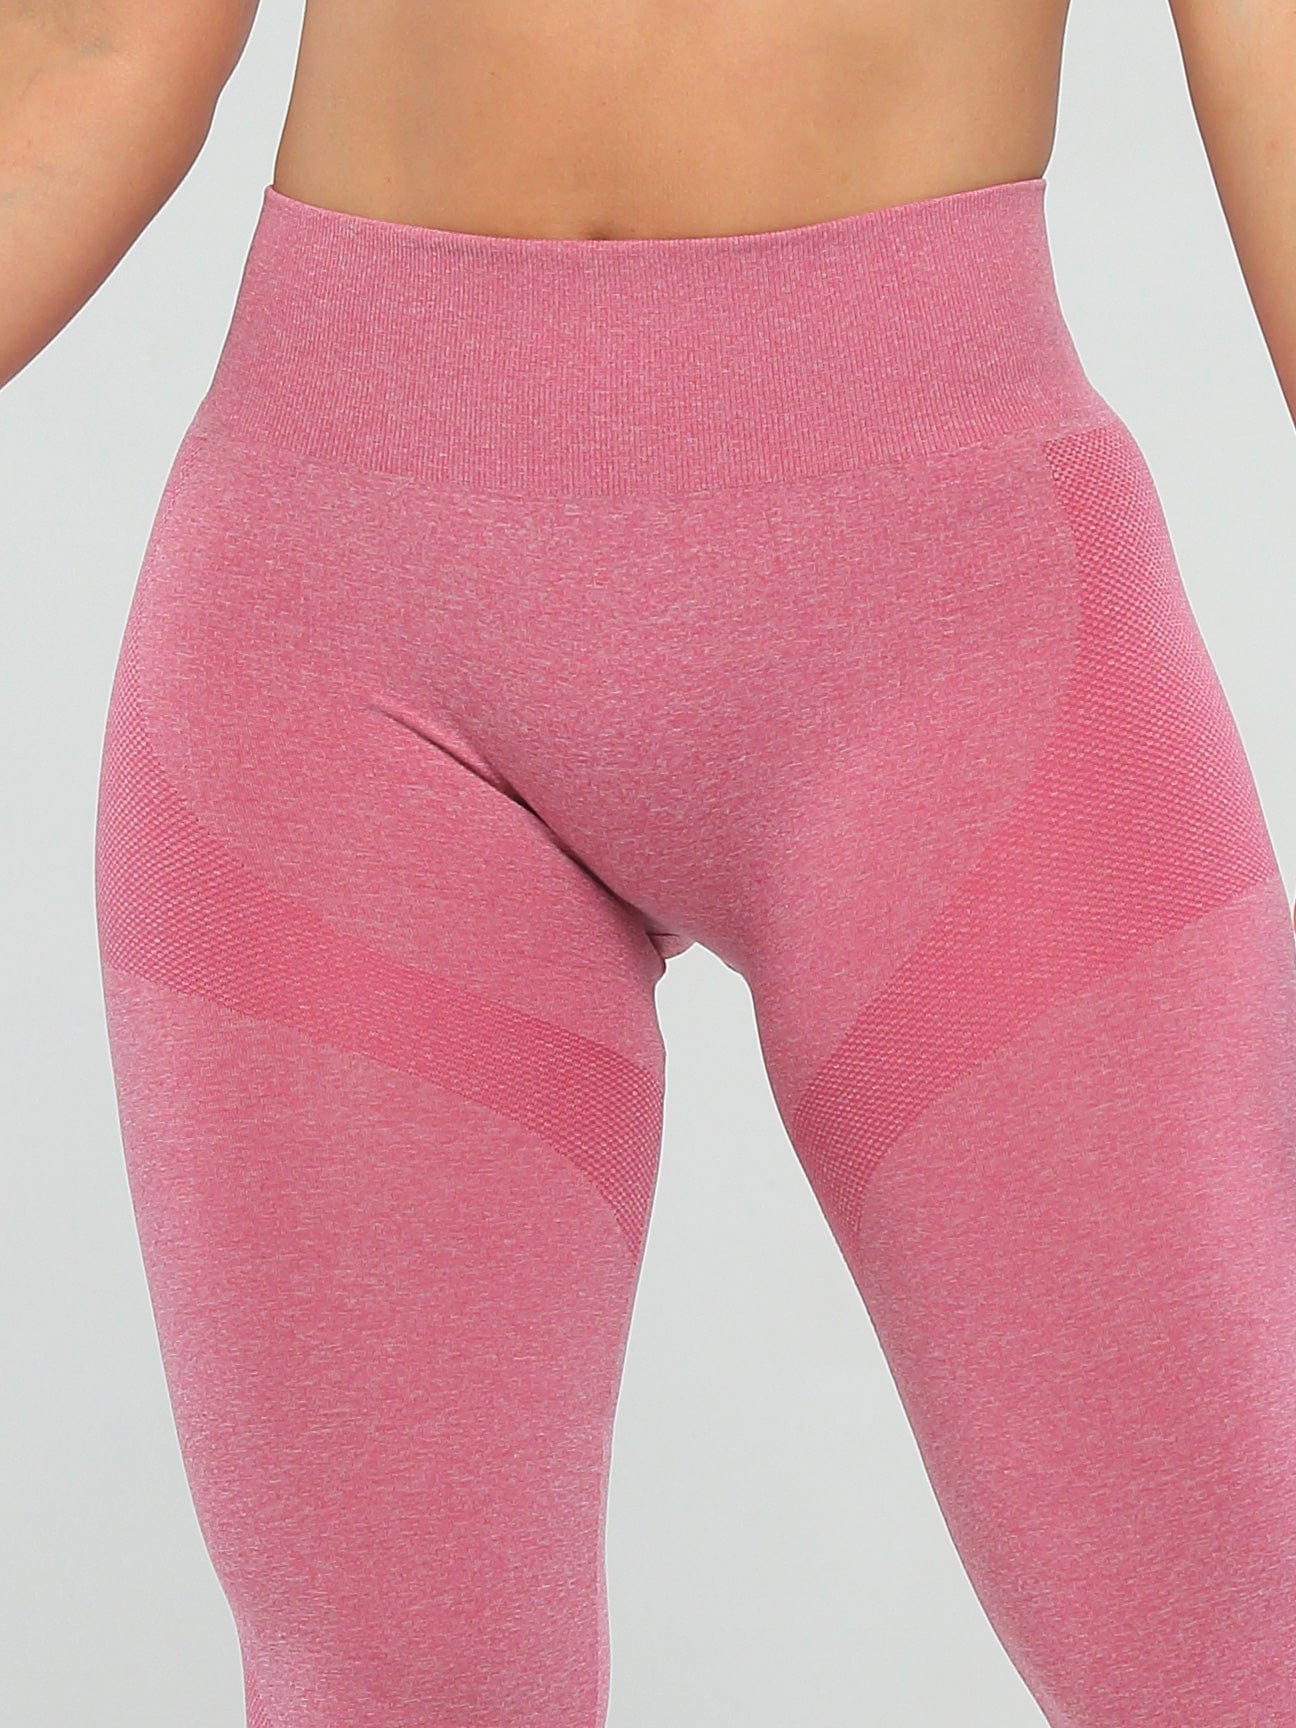  KLL Pink Bright Pattern Yoga Pants for Women Seamless Butt  Lifting Leggings X-Small : Clothing, Shoes & Jewelry